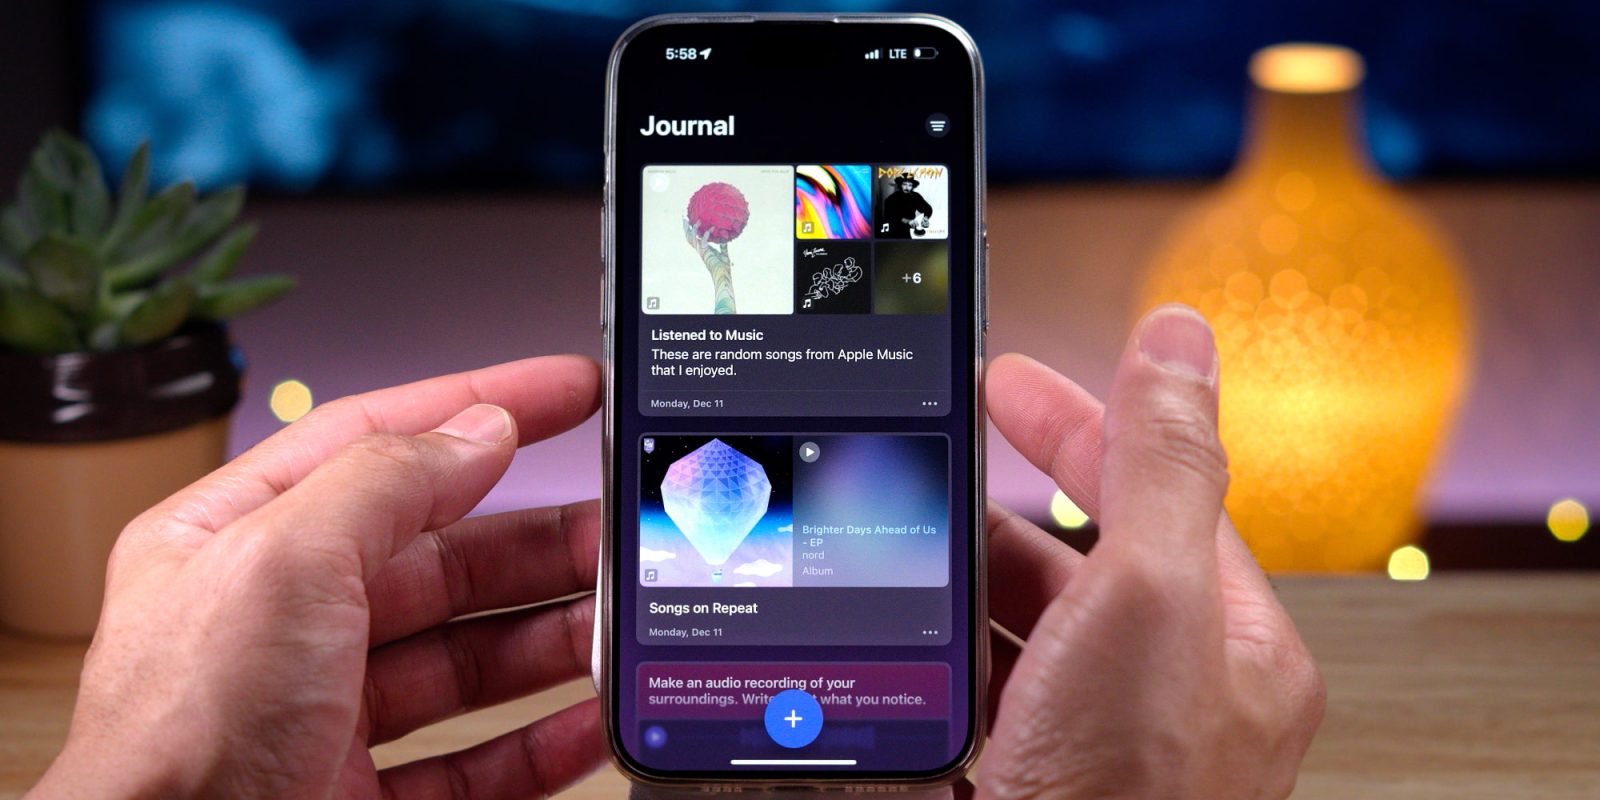 Apple’s Journal app for iPhone